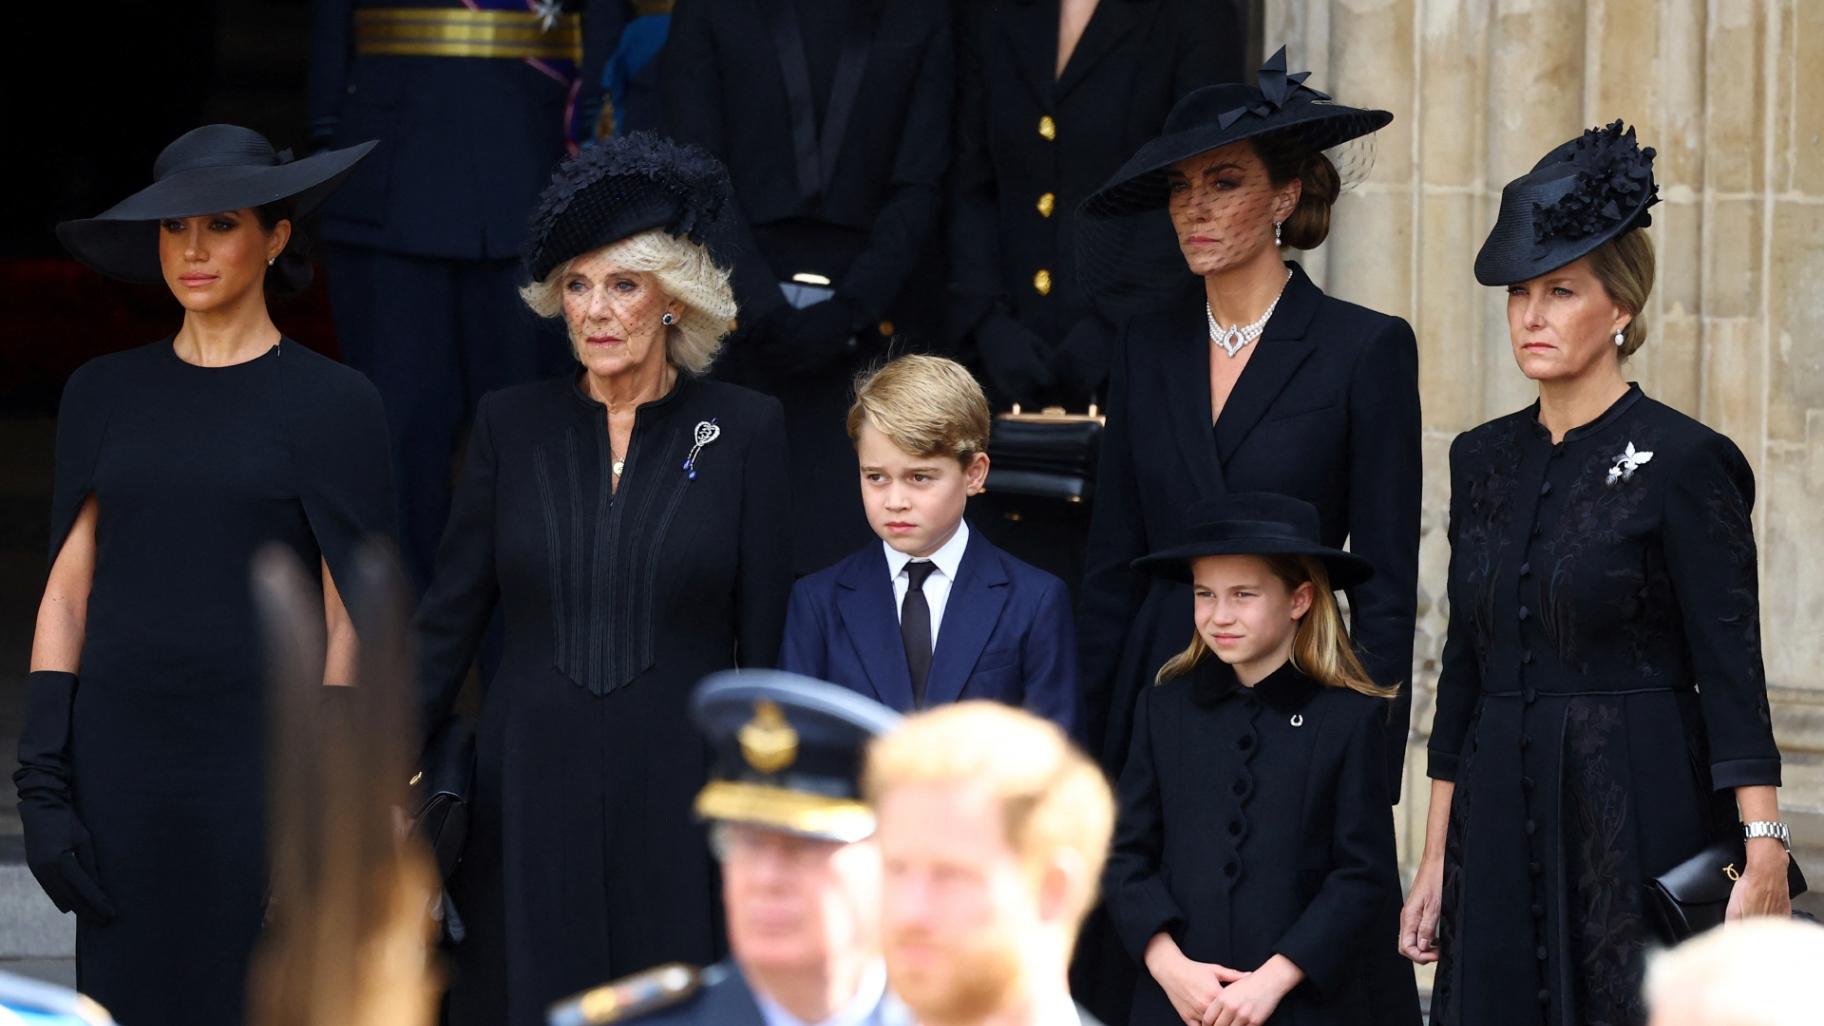 Camilla, the Queen Consort, Prince George, Princess Charlotte, Kate, Princess of Wales, Meghan, Duchess of Sussex and Sophie, Countess of Wessex stand after a service at Westminster Abbey on the day of the state funeral and burial of Britain’s Queen Elizabeth in London, Monday Sept. 19, 2022. (Hannah Mckay / Pool Photo via AP)